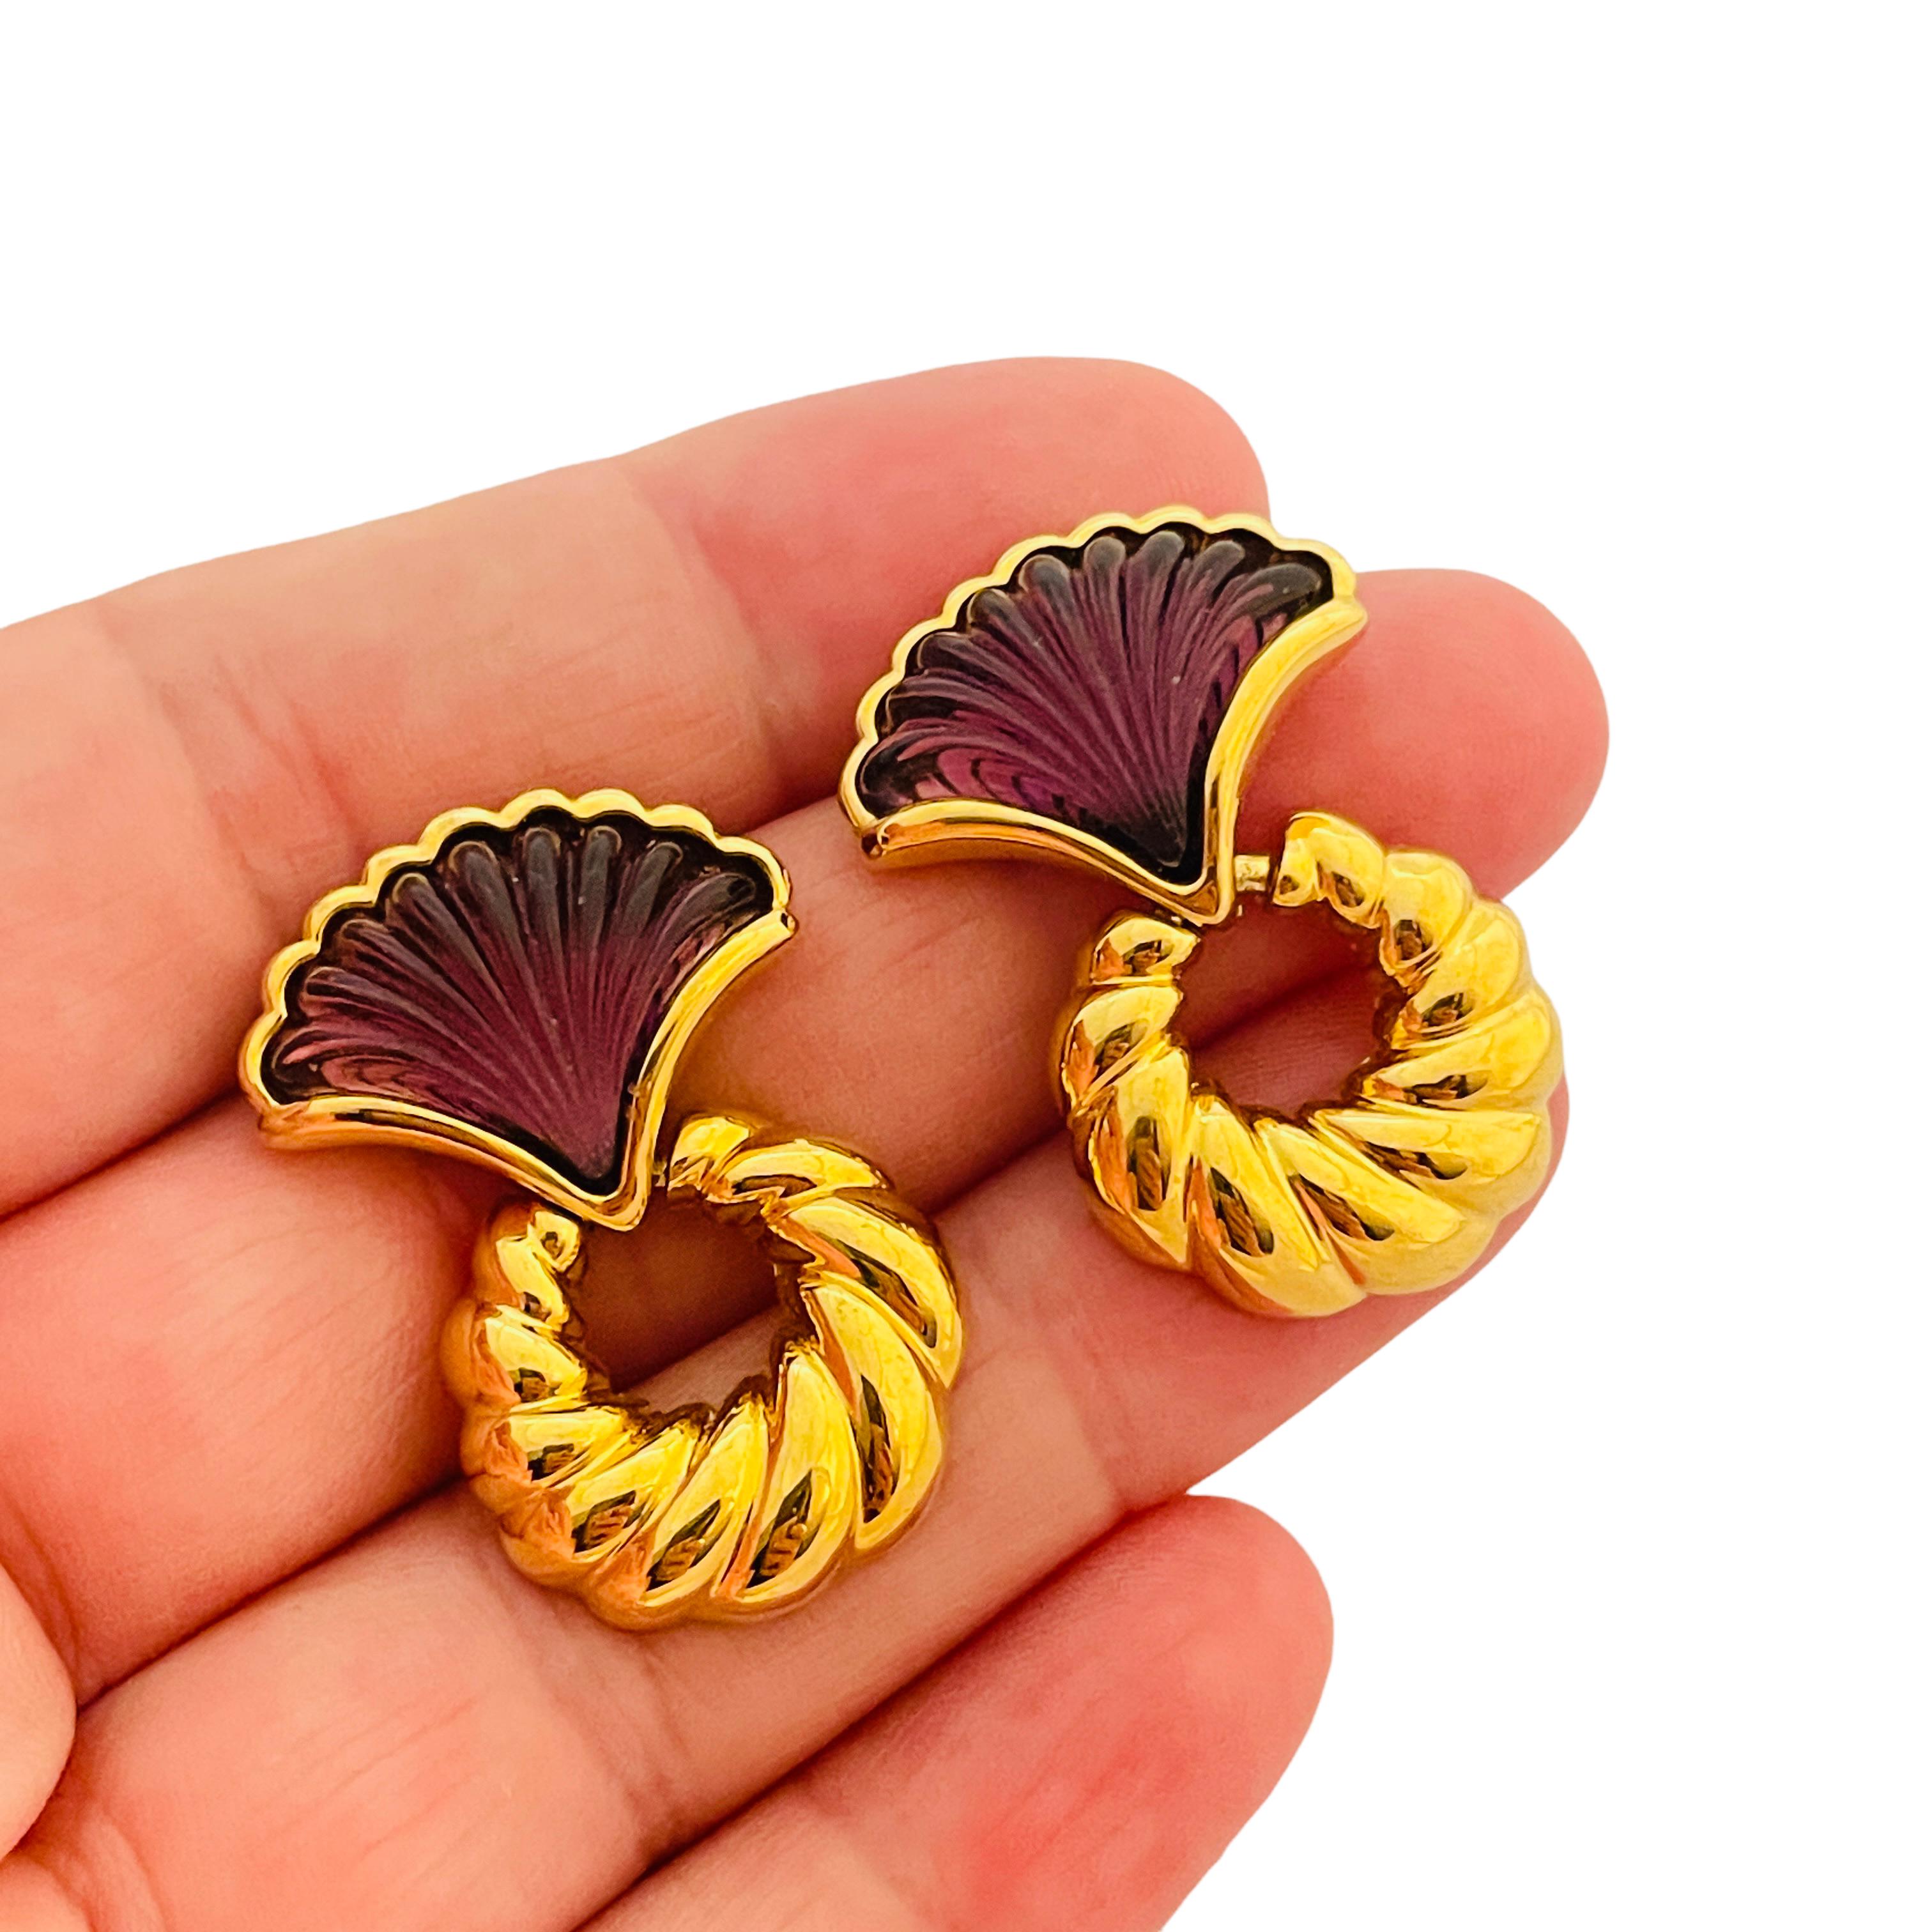 DETAILS

• unsigned

• gold tone with glass

• vintage designer runway earrings

MEASUREMENTS

•  1.25